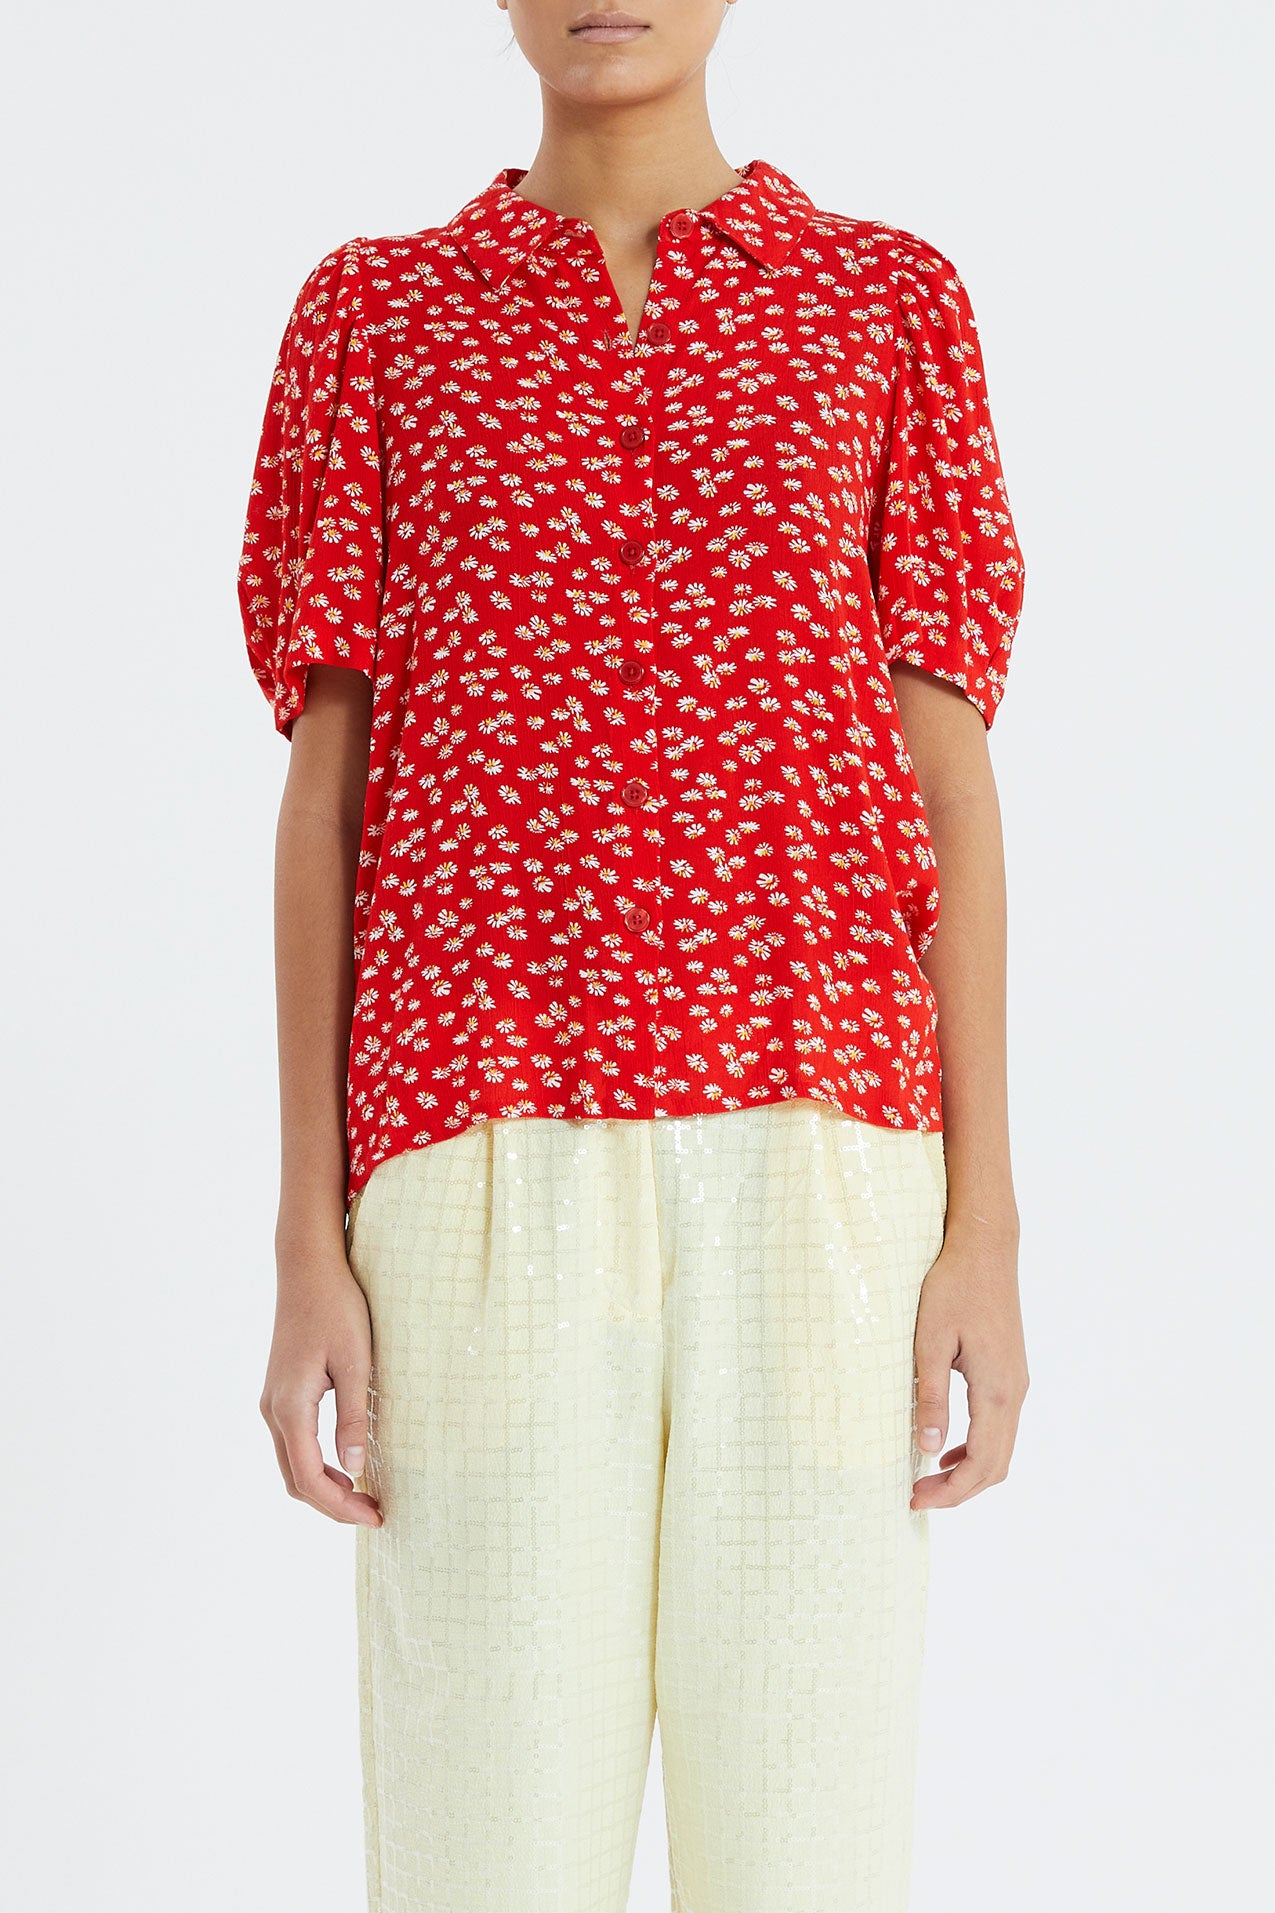 Lollys Laundry Aby Shirt - Red/Flower Print